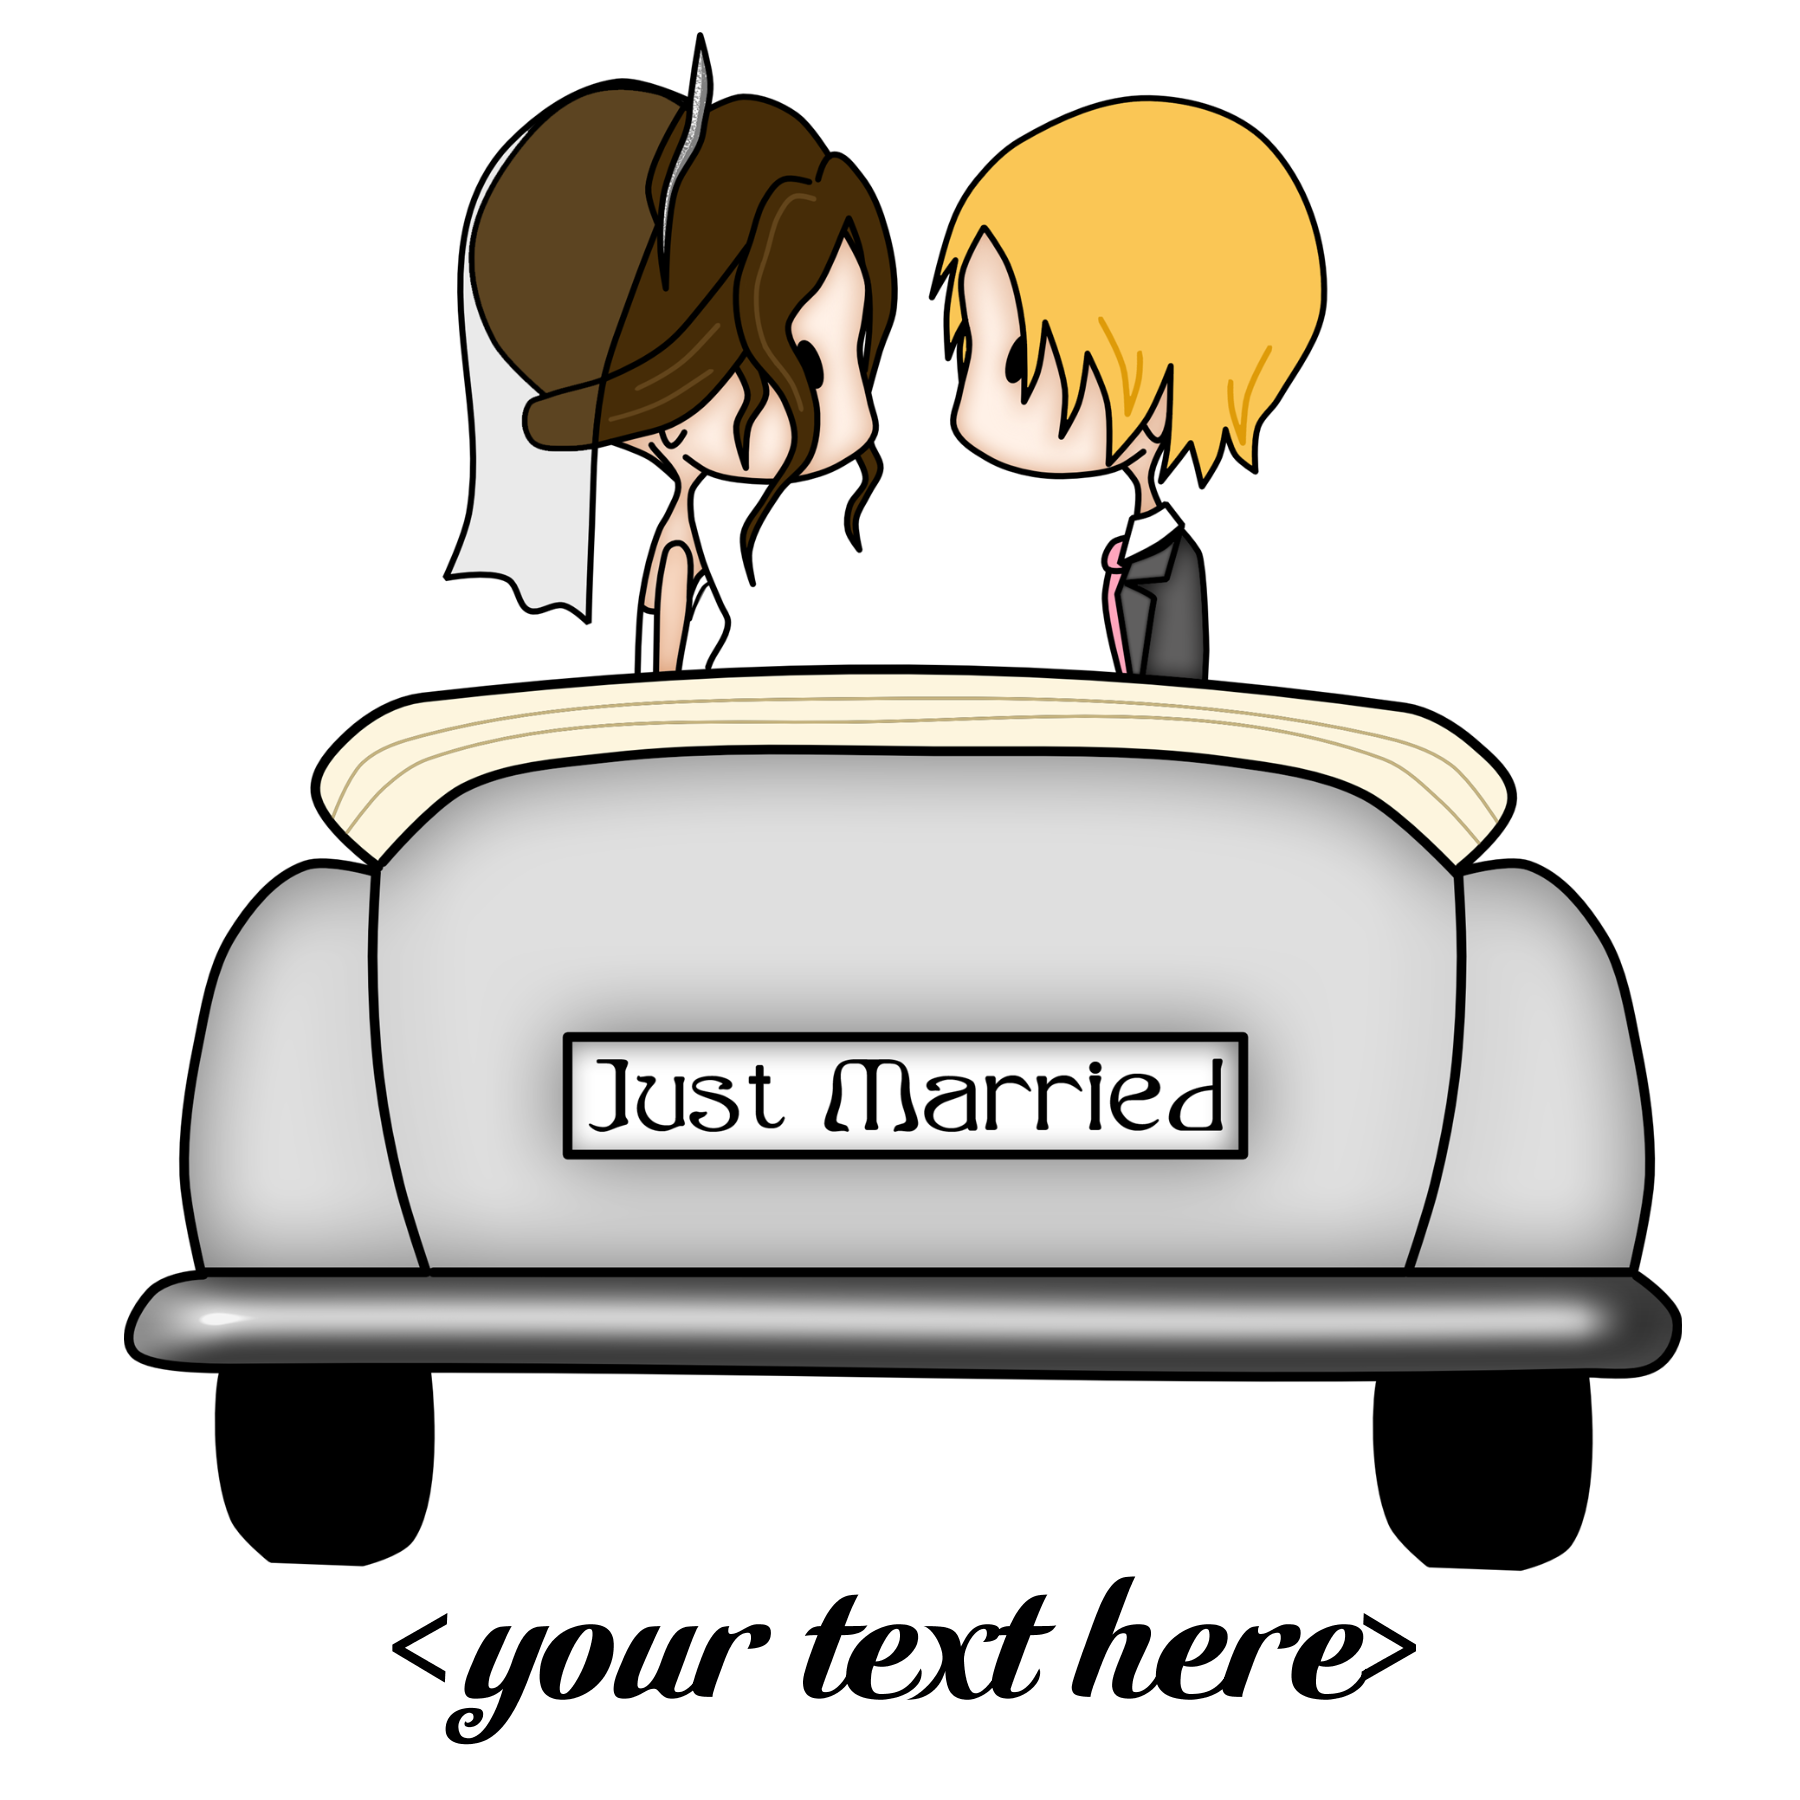 Download Image Hdpng.com  - Just Married, Transparent background PNG HD thumbnail